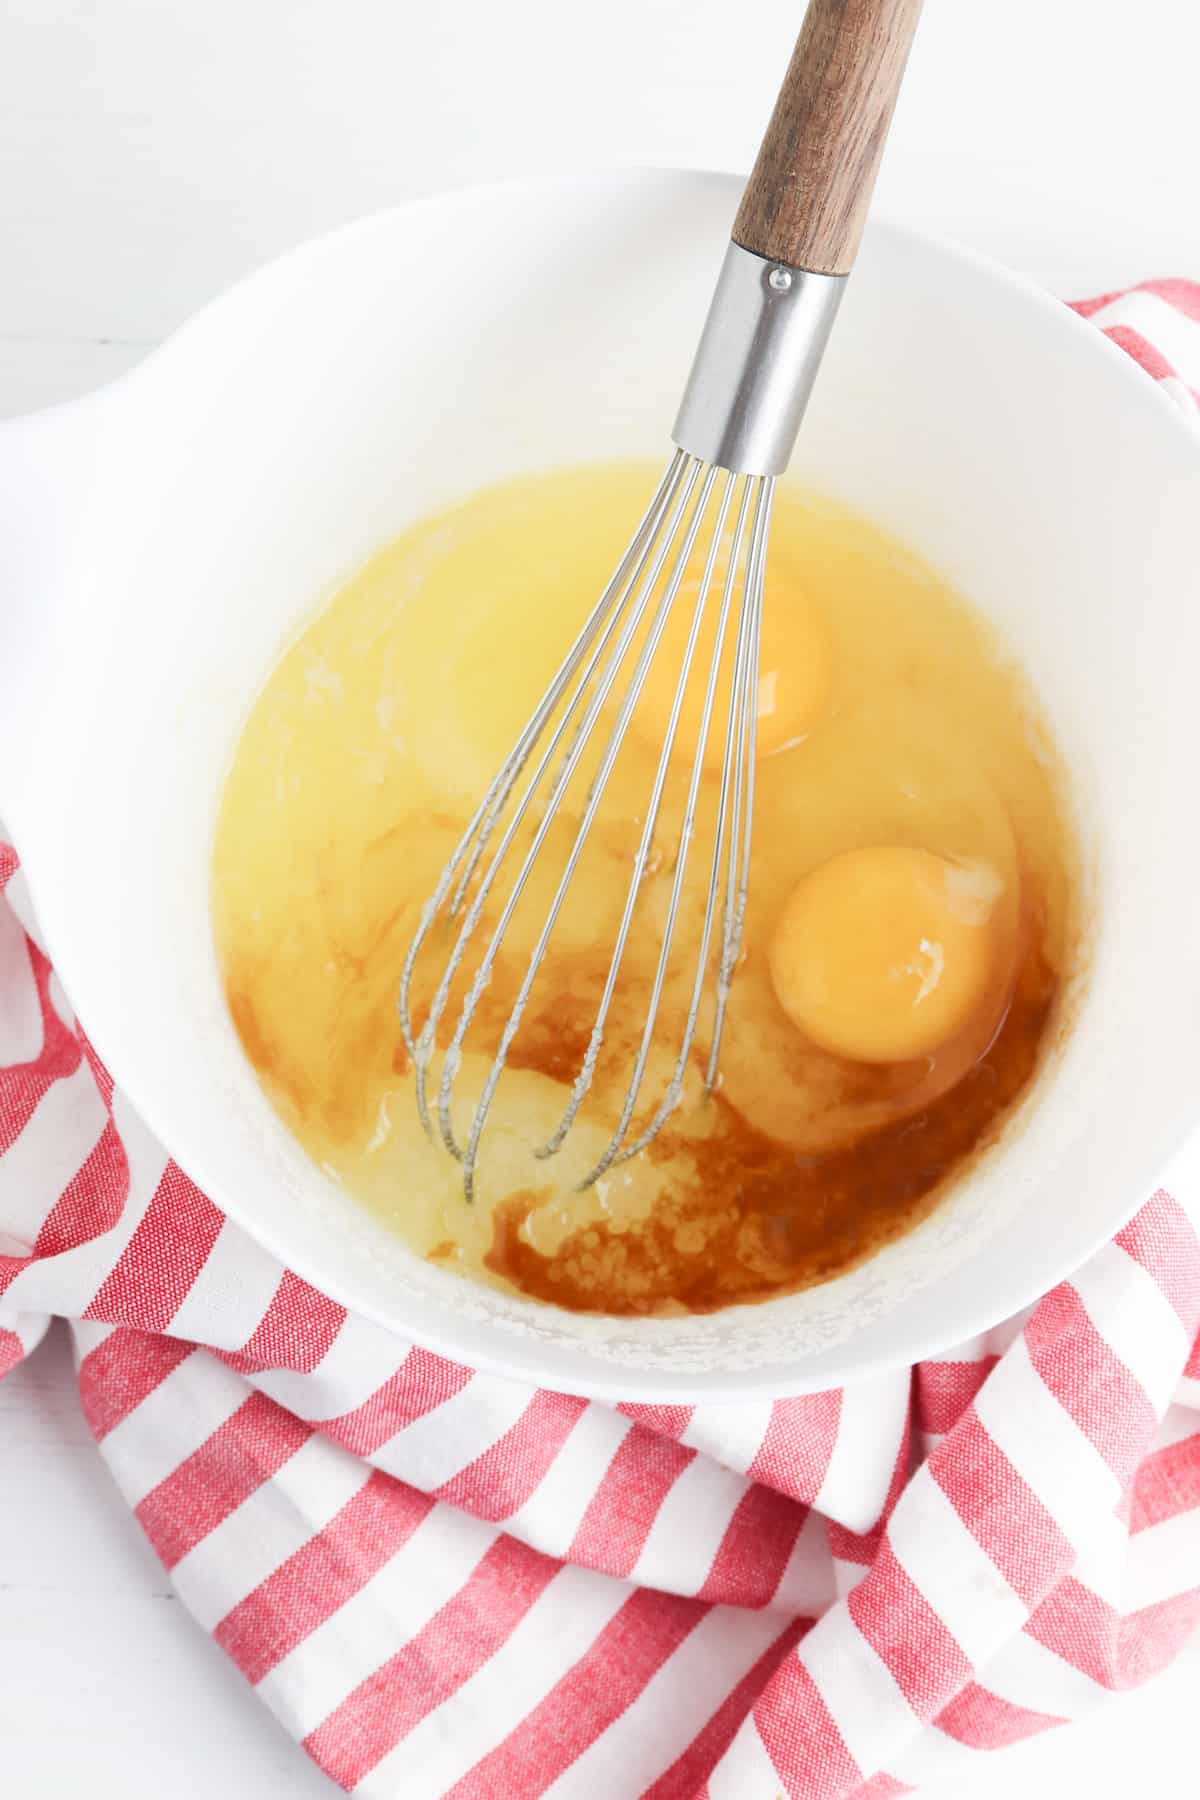 Sugar, butter, eggs in a white bowl on red striped cloth.